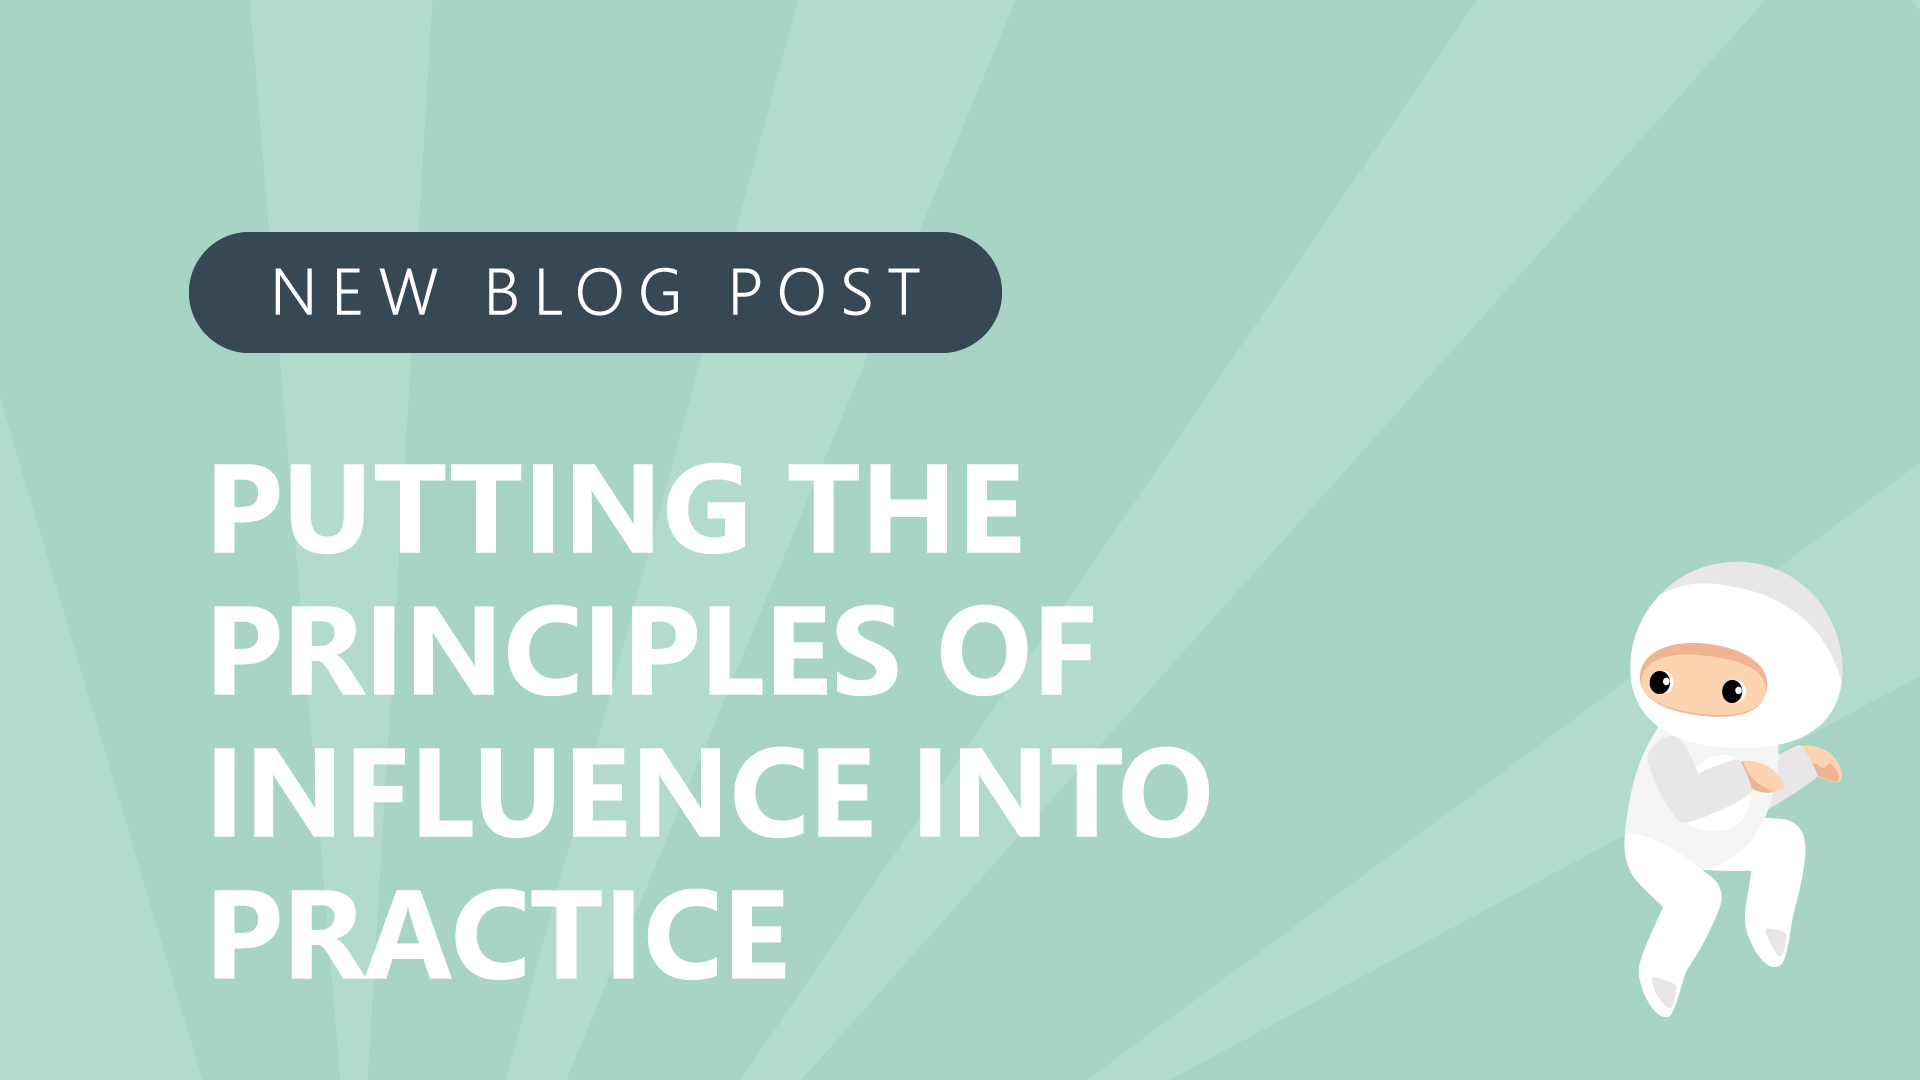 Putting the principles of influence into practice